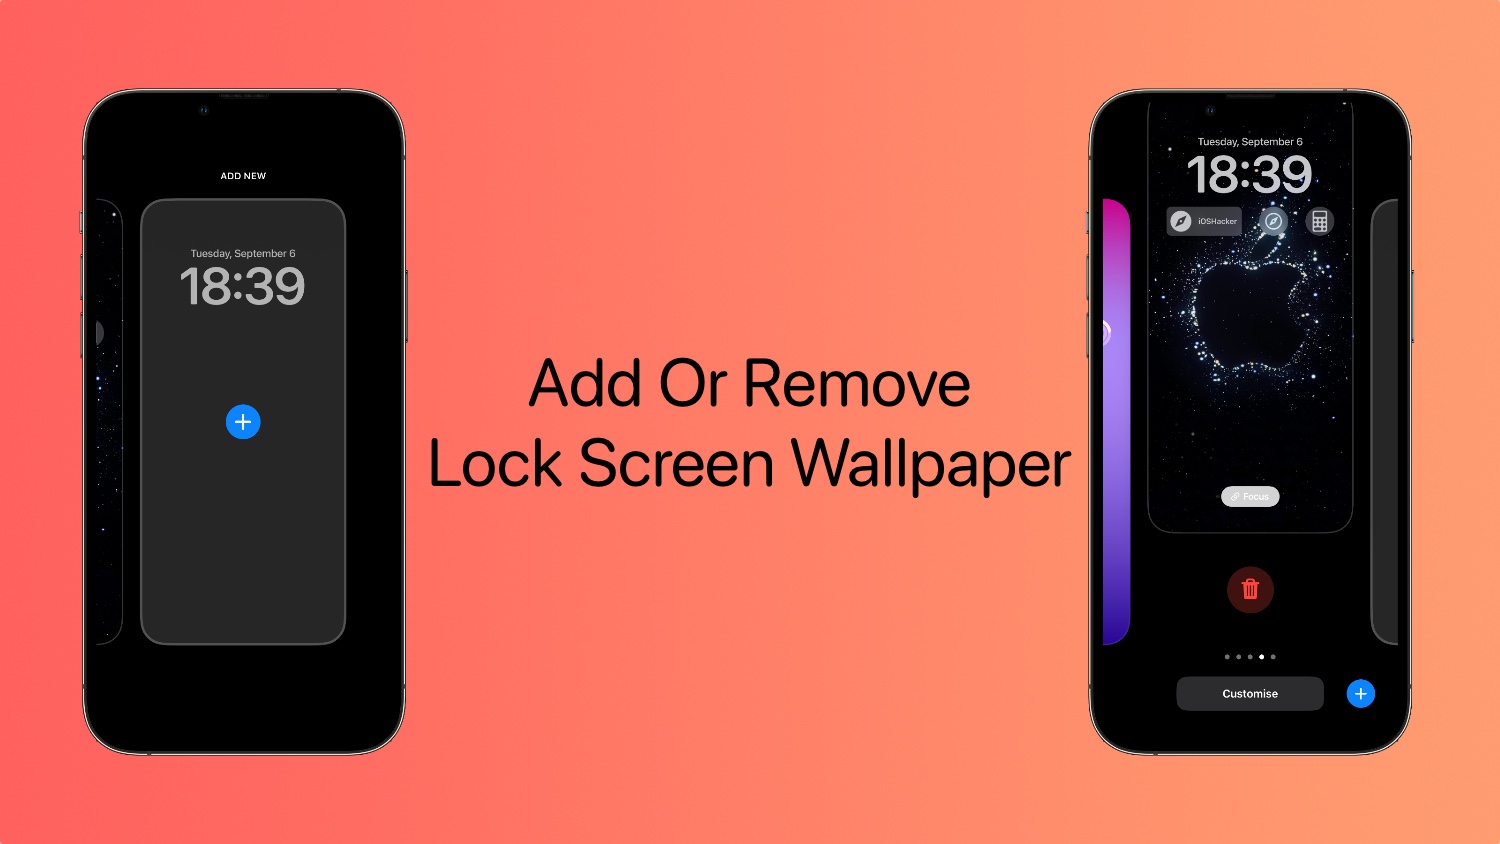 How To Add Or Remove Lock Screen Wallpaper From iPhone's Lock Screen  Gallery - iOS Hacker